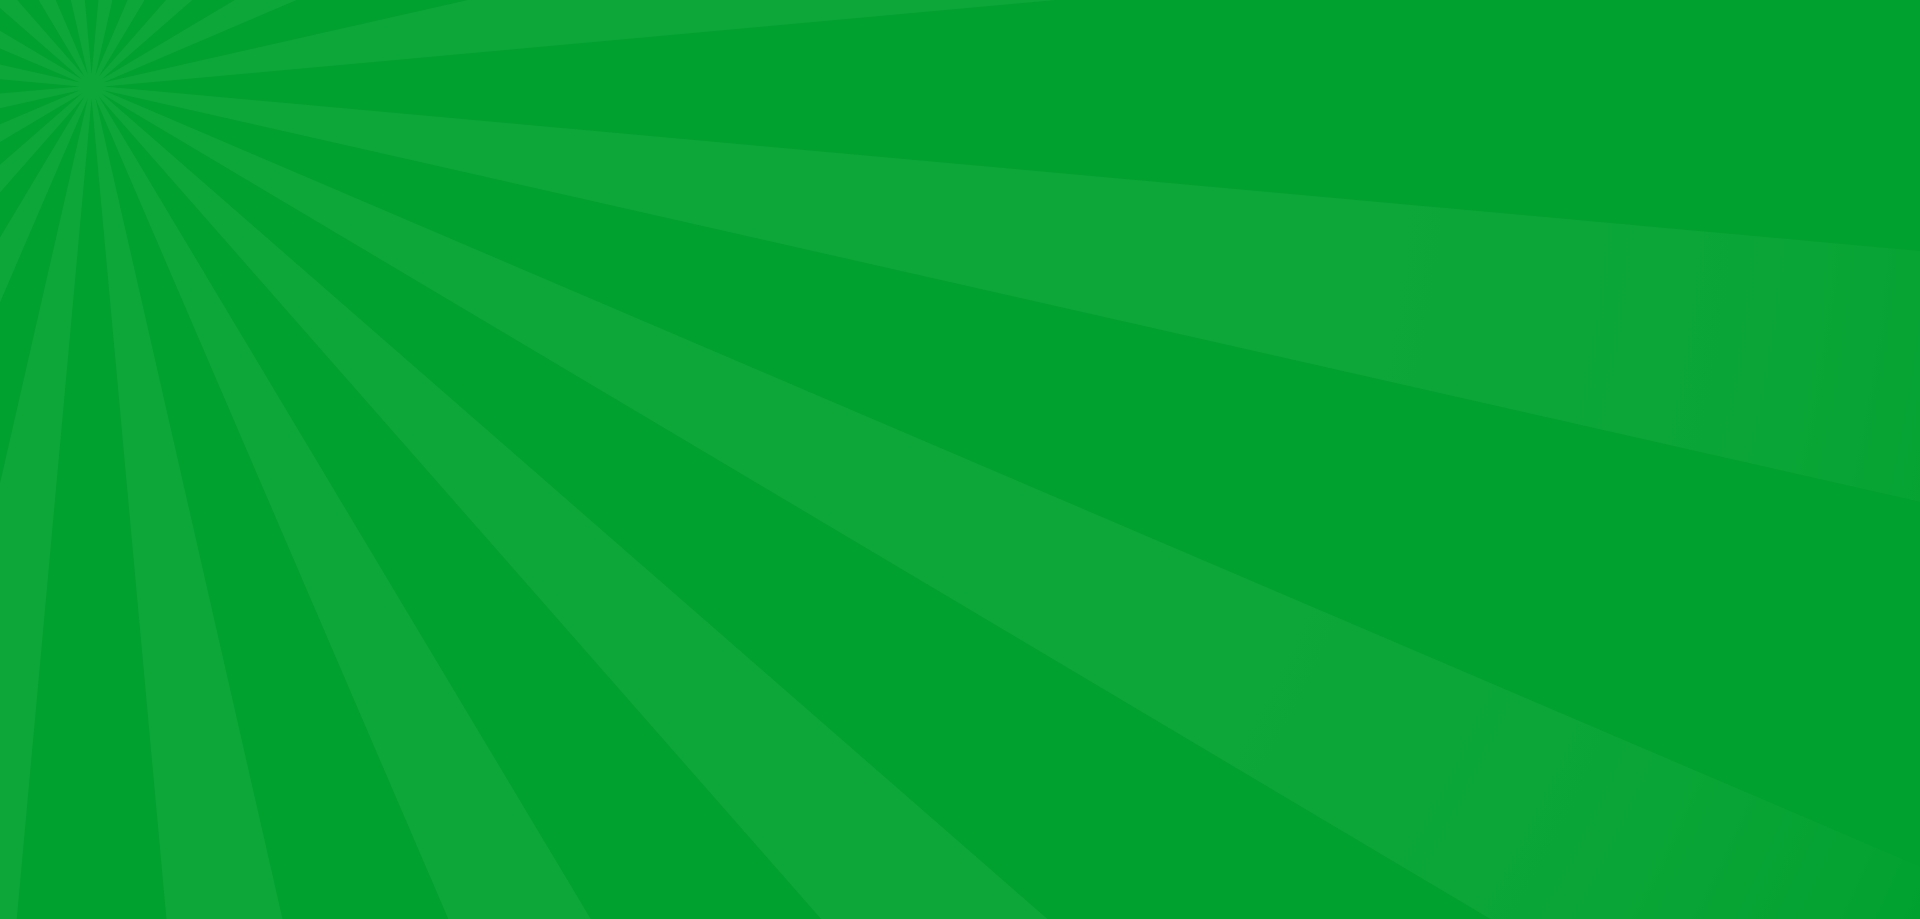 A two-tone green background